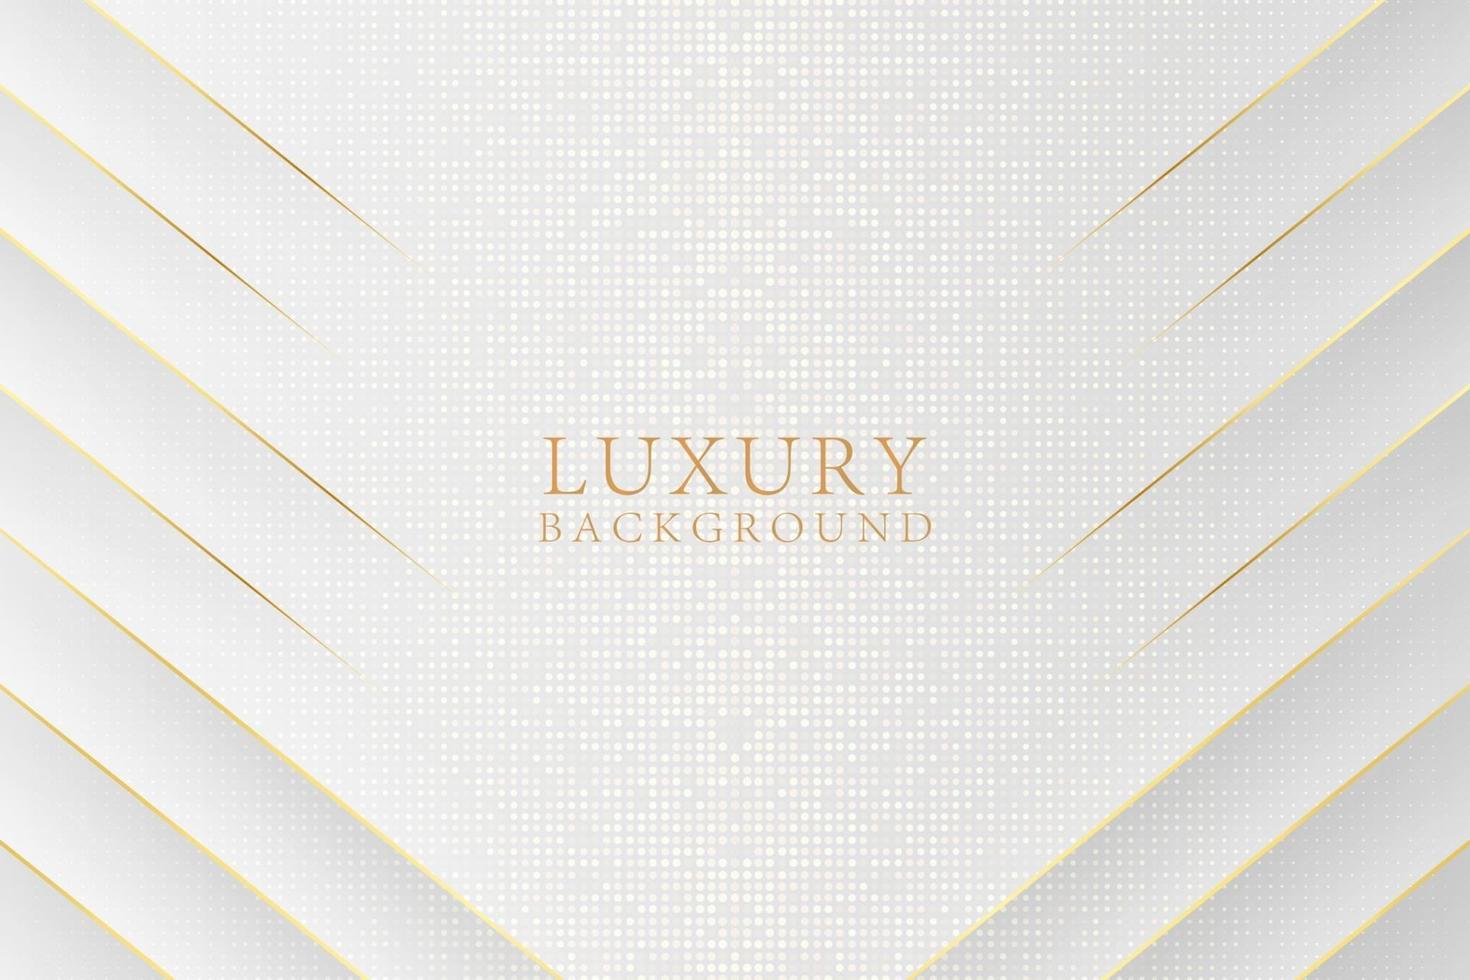 Modern abstract white luxury background vector